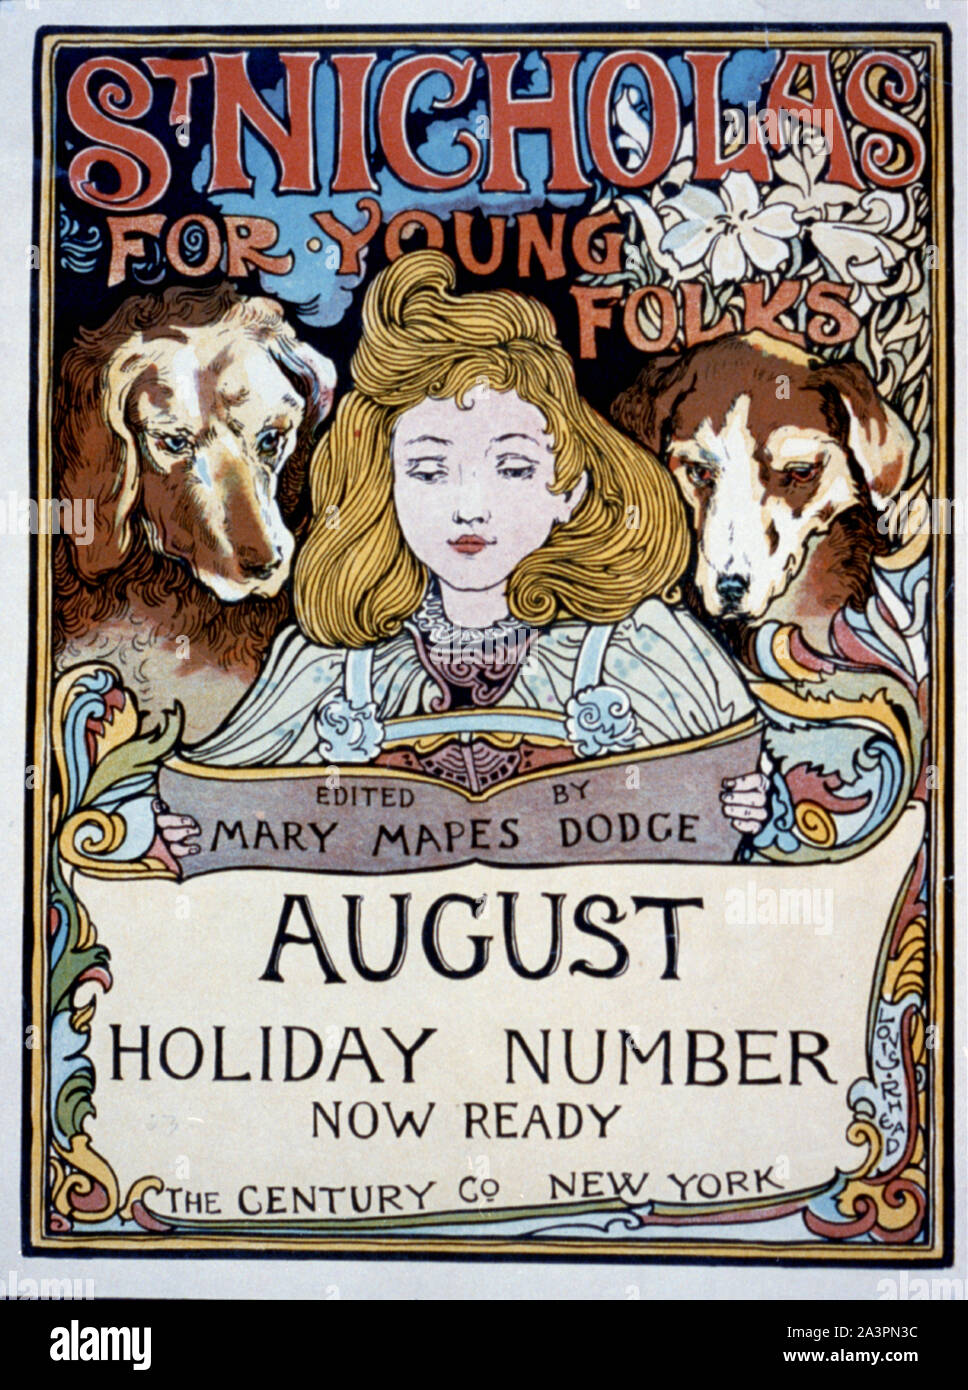 St. Nicholas for young folks, edited by Mary Mapes Dodge, August holiday number now ready : The Century Co., New York / Louis Rhead Stock Photo